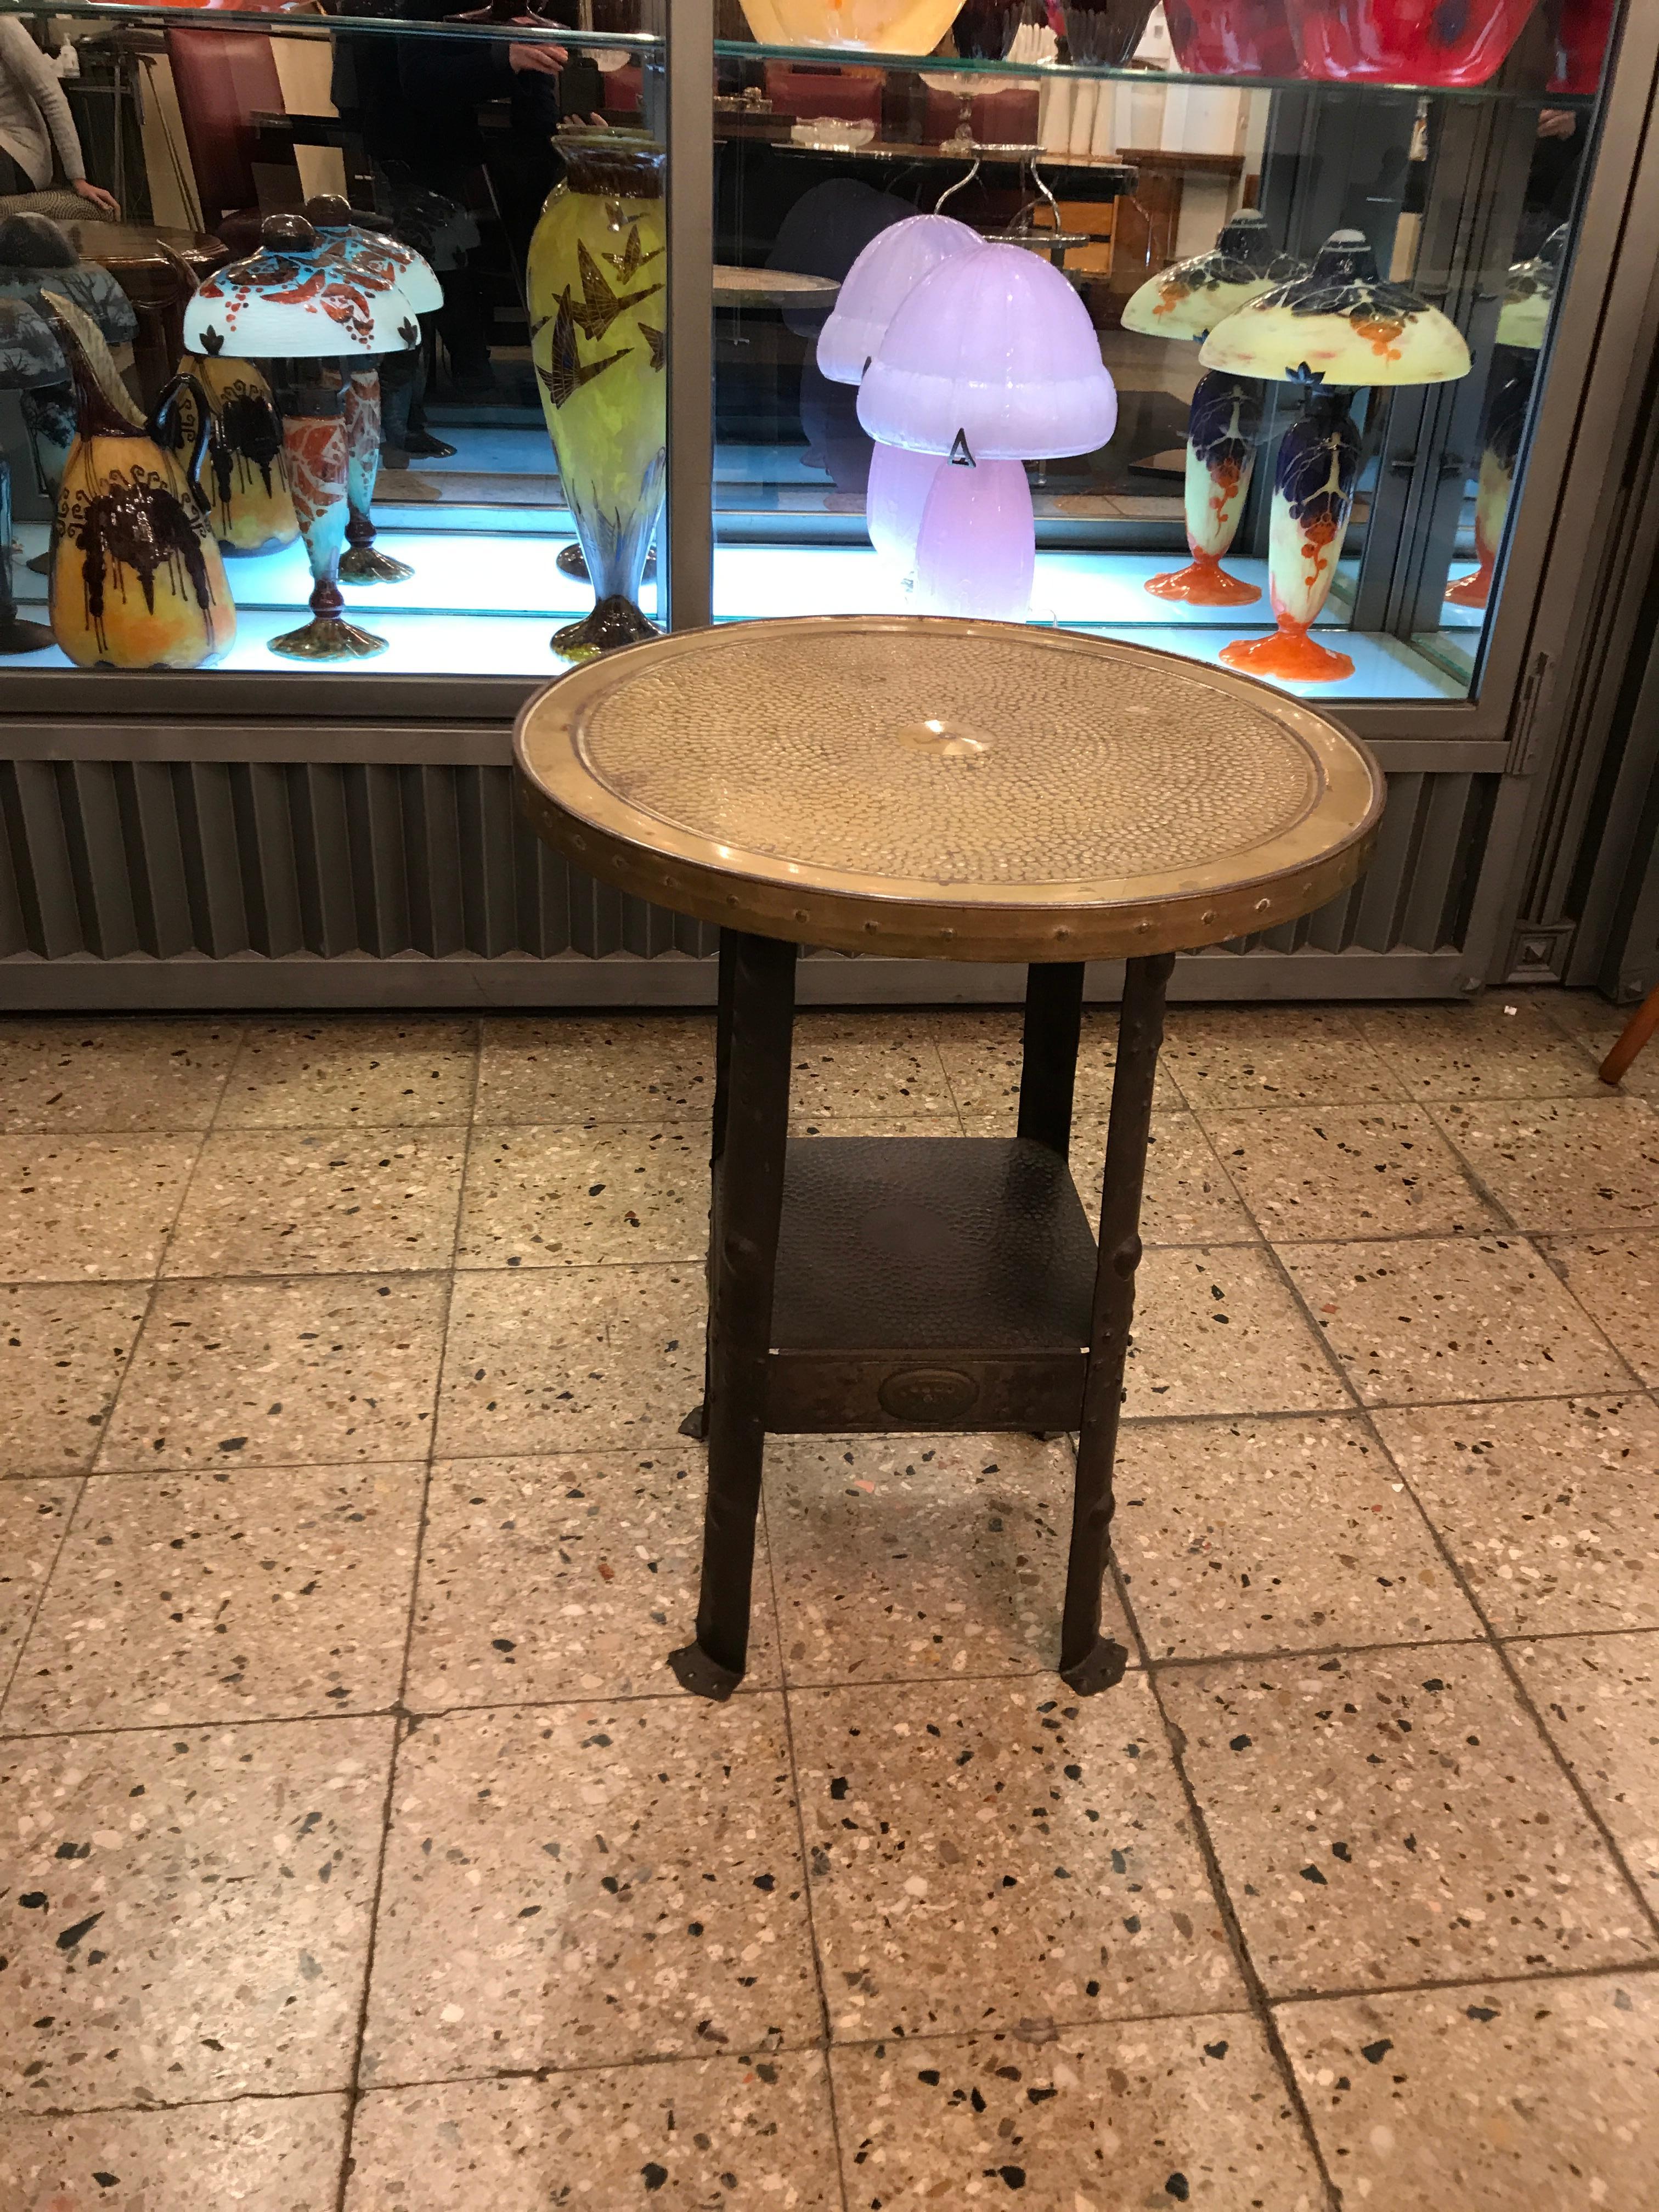 Table vienna Secession

Material: bronze
Style: Vienna Secession
Country: Vienna
We have specialized in the sale of Art Deco and Art Nouveau styles since 1982.If you have any questions we are at your disposal.
Pushing the button that reads 'View All